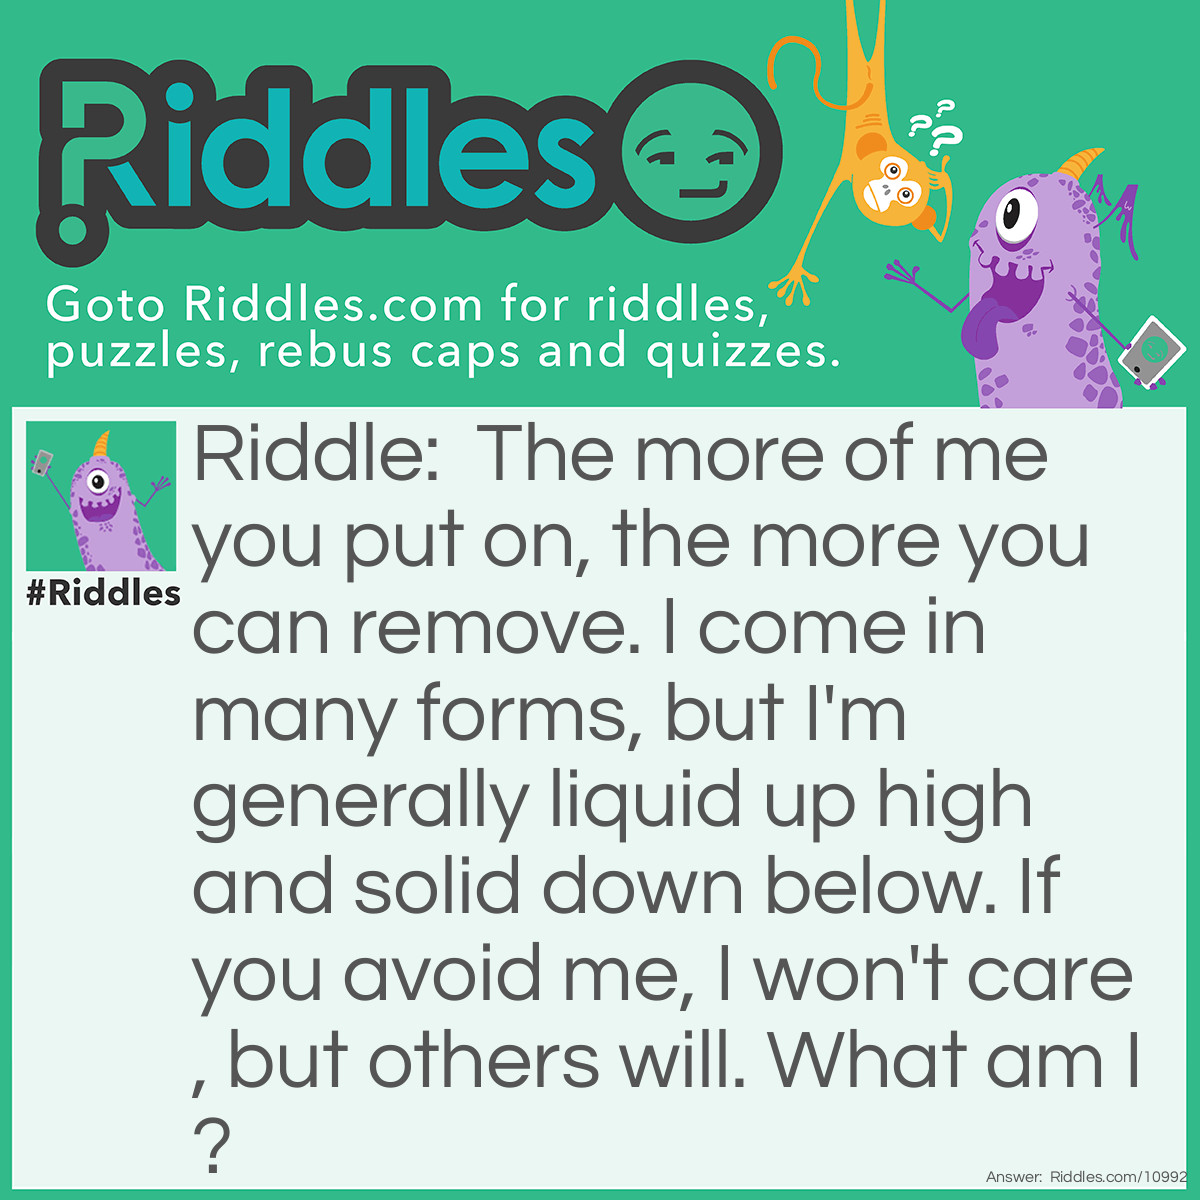 Riddle: The more of me you put on, the more you can remove. I come in many forms, but I'm generally liquid up high and solid down below. If you avoid me, I won't care, but others will. What am I? Answer: Soap.